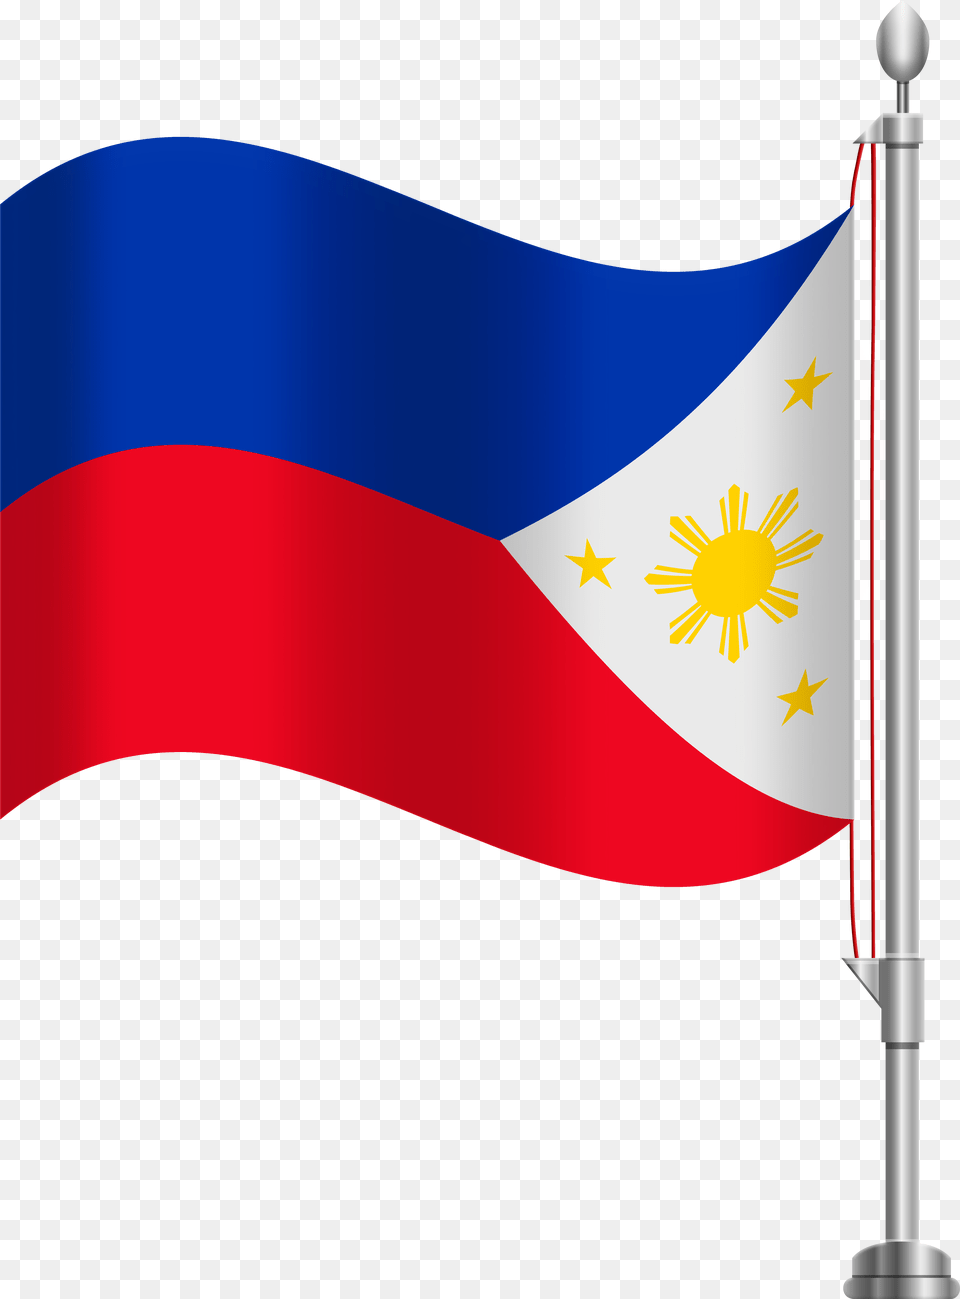 Clipart Of Philippines Flags And Web Flag Pole Philippines, Philippines Flag Free Transparent Png